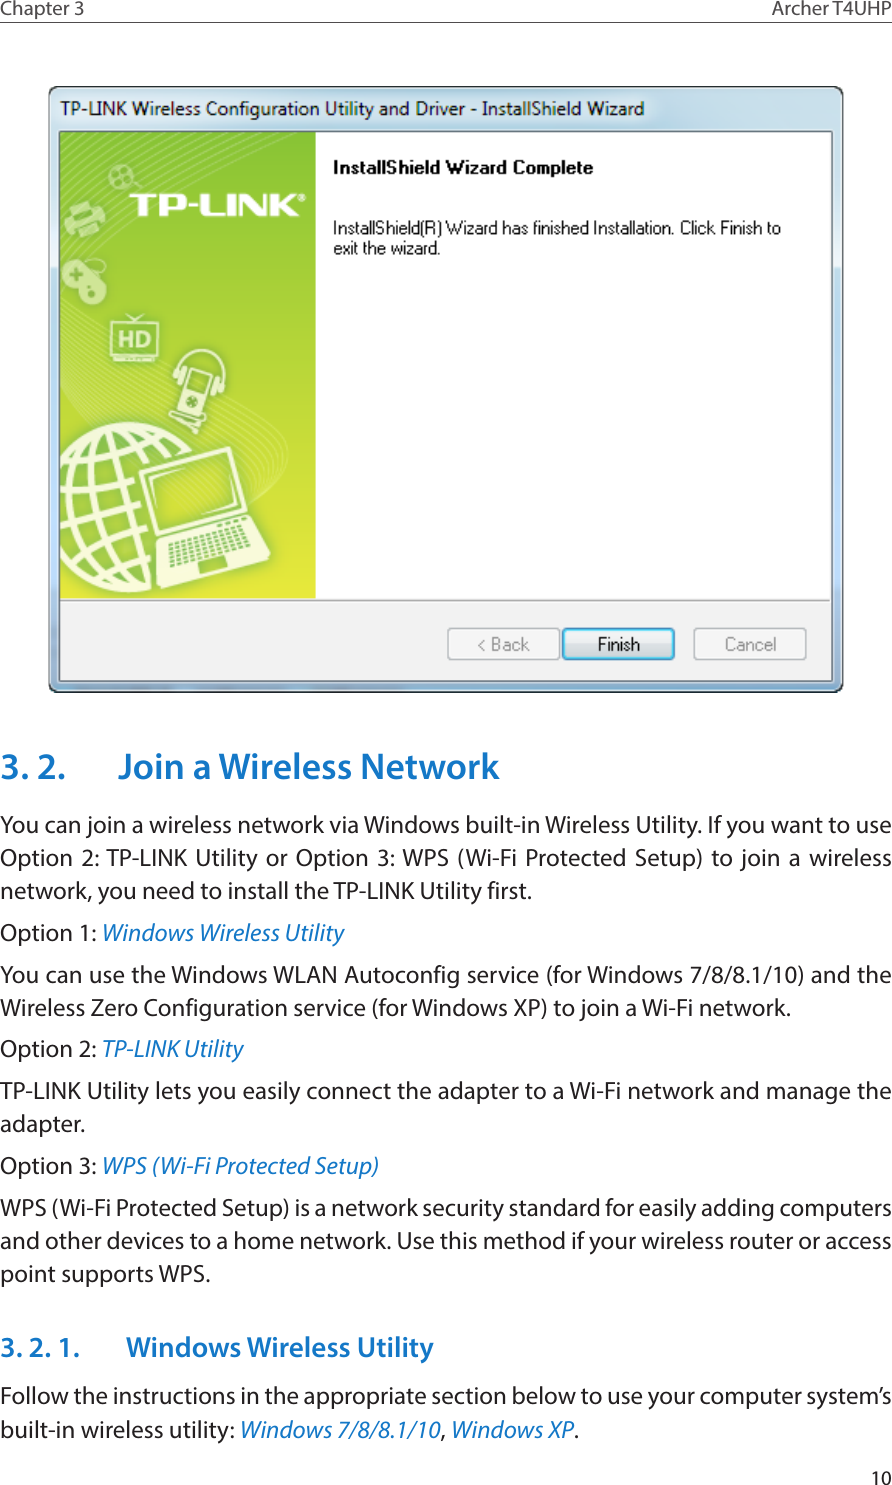 10Chapter 3 Archer T4UHP3. 2.  Join a Wireless NetworkYou can join a wireless network via Windows built-in Wireless Utility. If you want to use Option 2: TP-LINK Utility or Option 3: WPS (Wi-Fi Protected Setup) to join a wireless network, you need to install the TP-LINK Utility first.Option 1: Windows Wireless UtilityYou can use the Windows WLAN Autoconfig service (for Windows 7/8/8.1/10) and the Wireless Zero Configuration service (for Windows XP) to join a Wi-Fi network.Option 2: TP-LINK UtilityTP-LINK Utility lets you easily connect the adapter to a Wi-Fi network and manage the adapter. Option 3: WPS (Wi-Fi Protected Setup)WPS (Wi-Fi Protected Setup) is a network security standard for easily adding computers and other devices to a home network. Use this method if your wireless router or access point supports WPS.3. 2. 1.   Windows Wireless UtilityFollow the instructions in the appropriate section below to use your computer system’s built-in wireless utility: Windows 7/8/8.1/10, Windows XP.